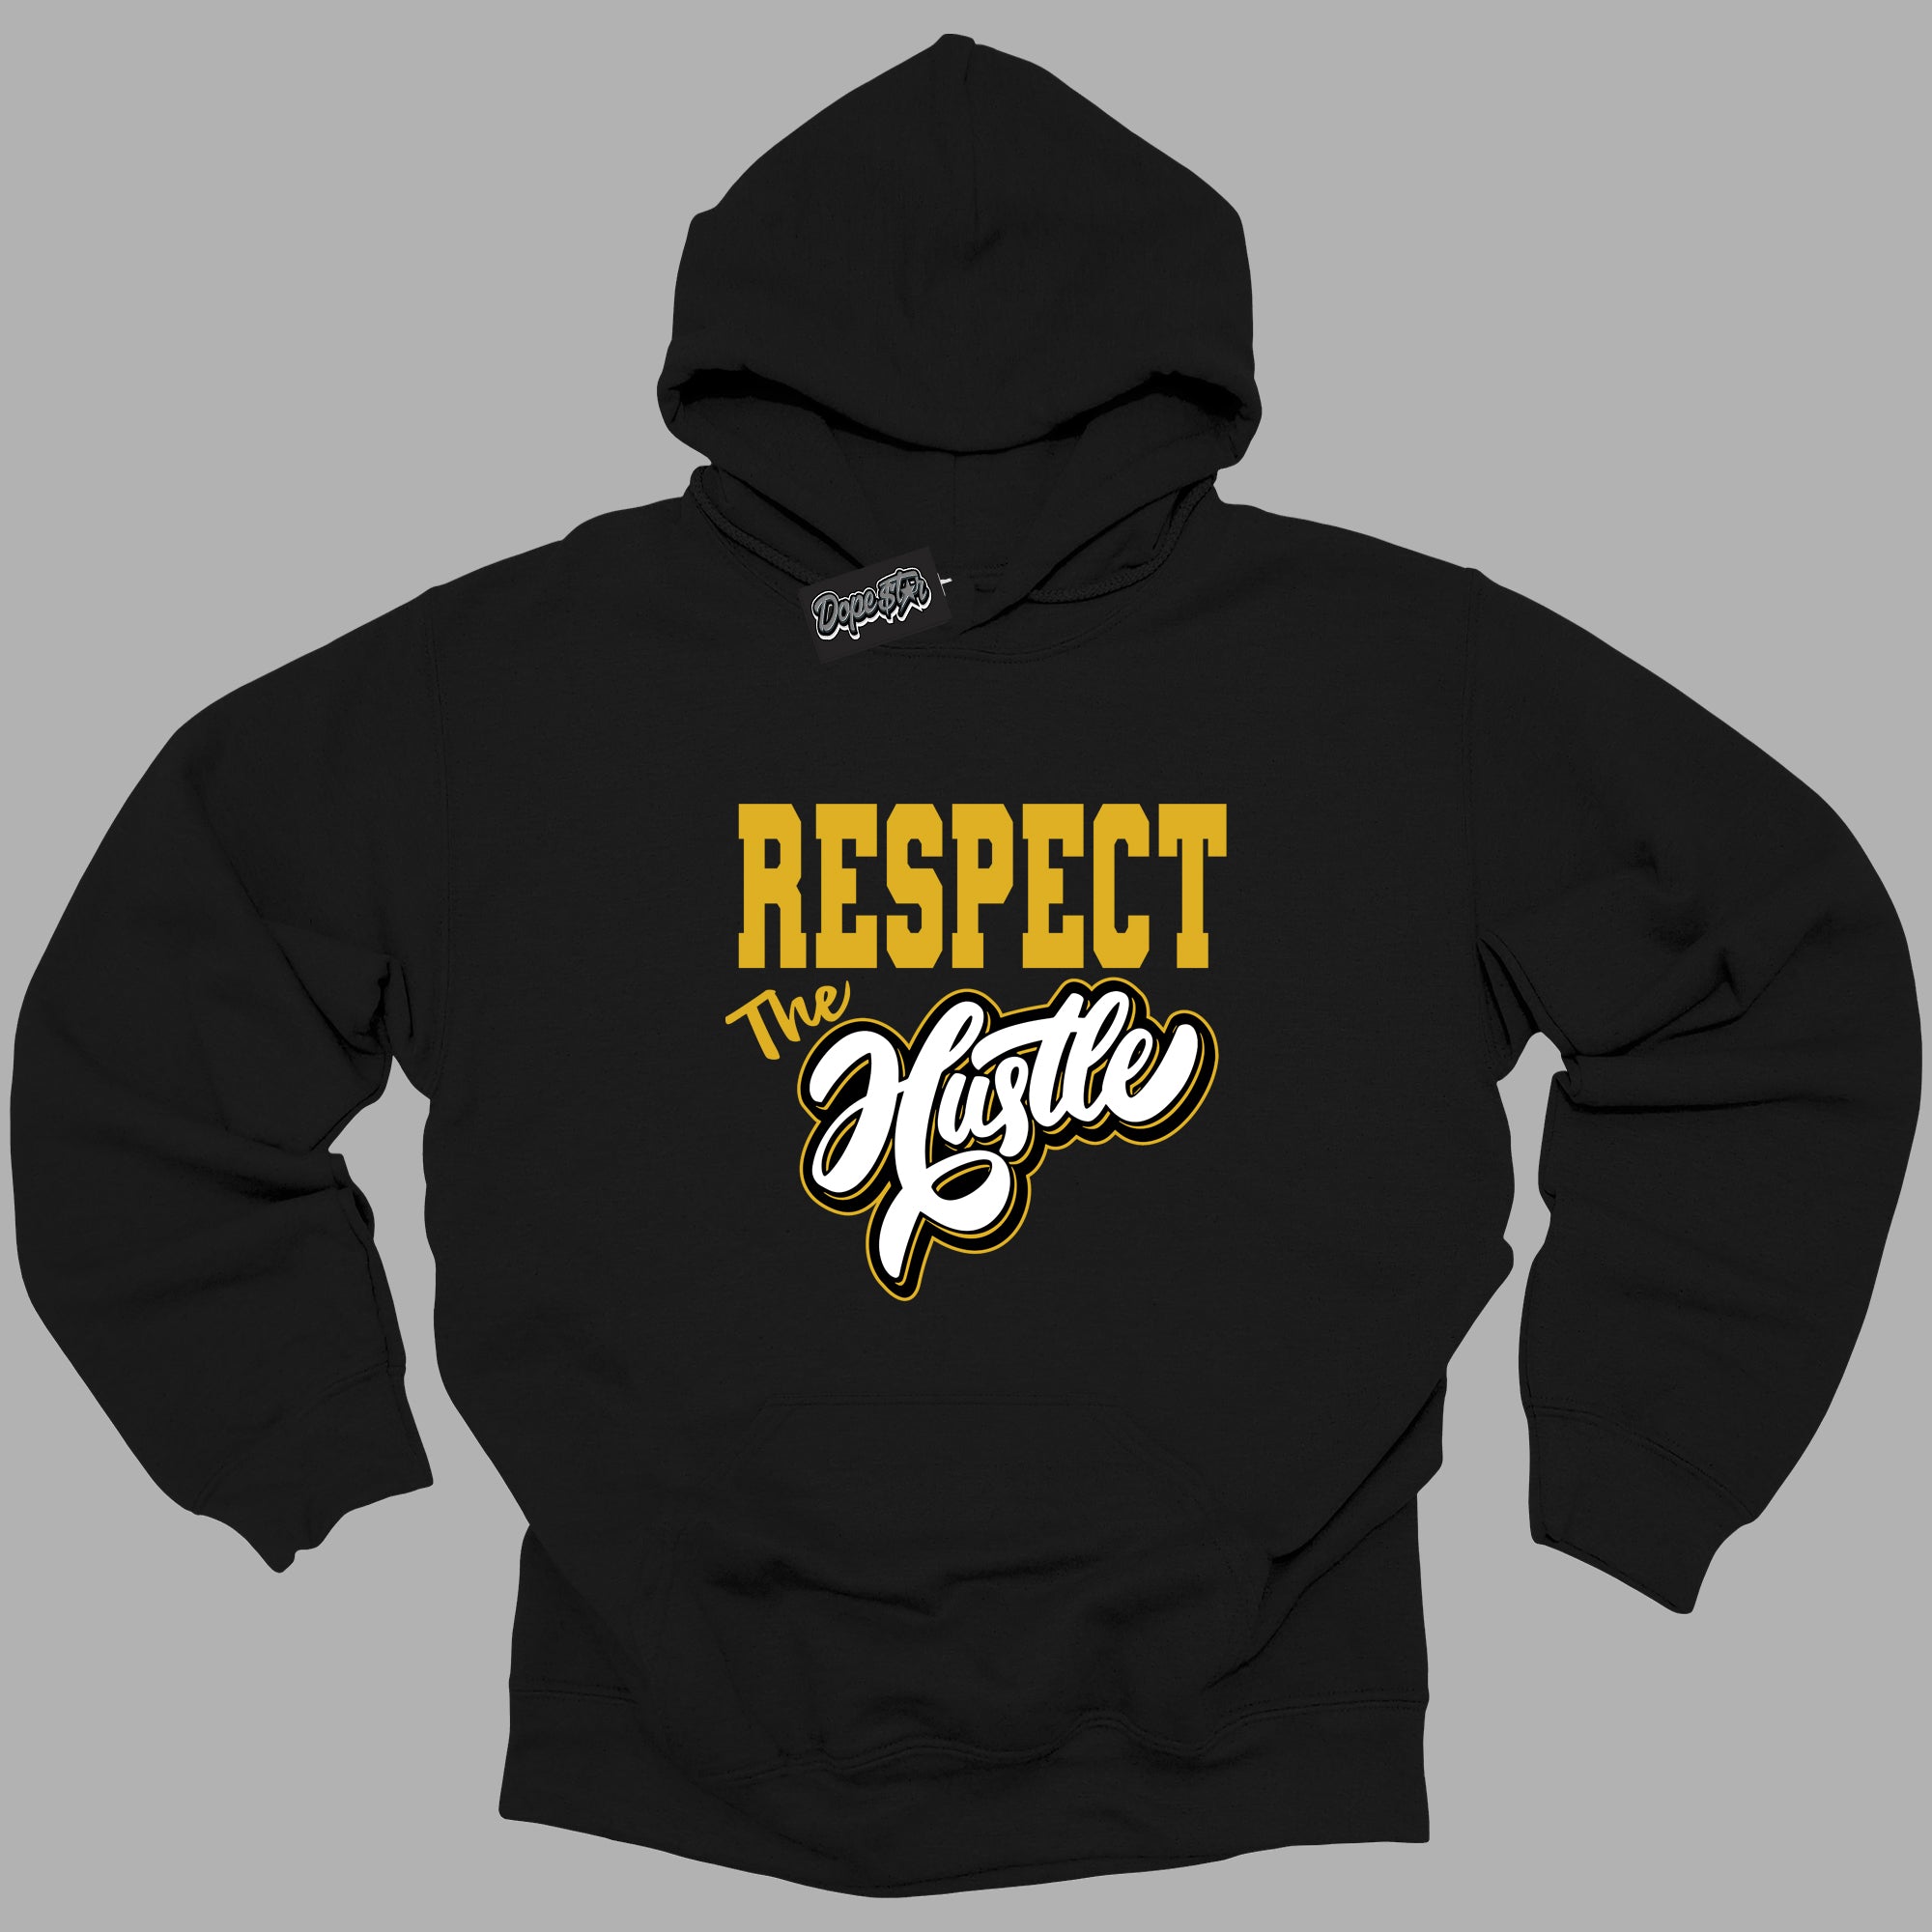 Cool Black Hoodie with “Respect The Hustle ”  design that Perfectly Matches Yellow Ochre 6s Sneakers.